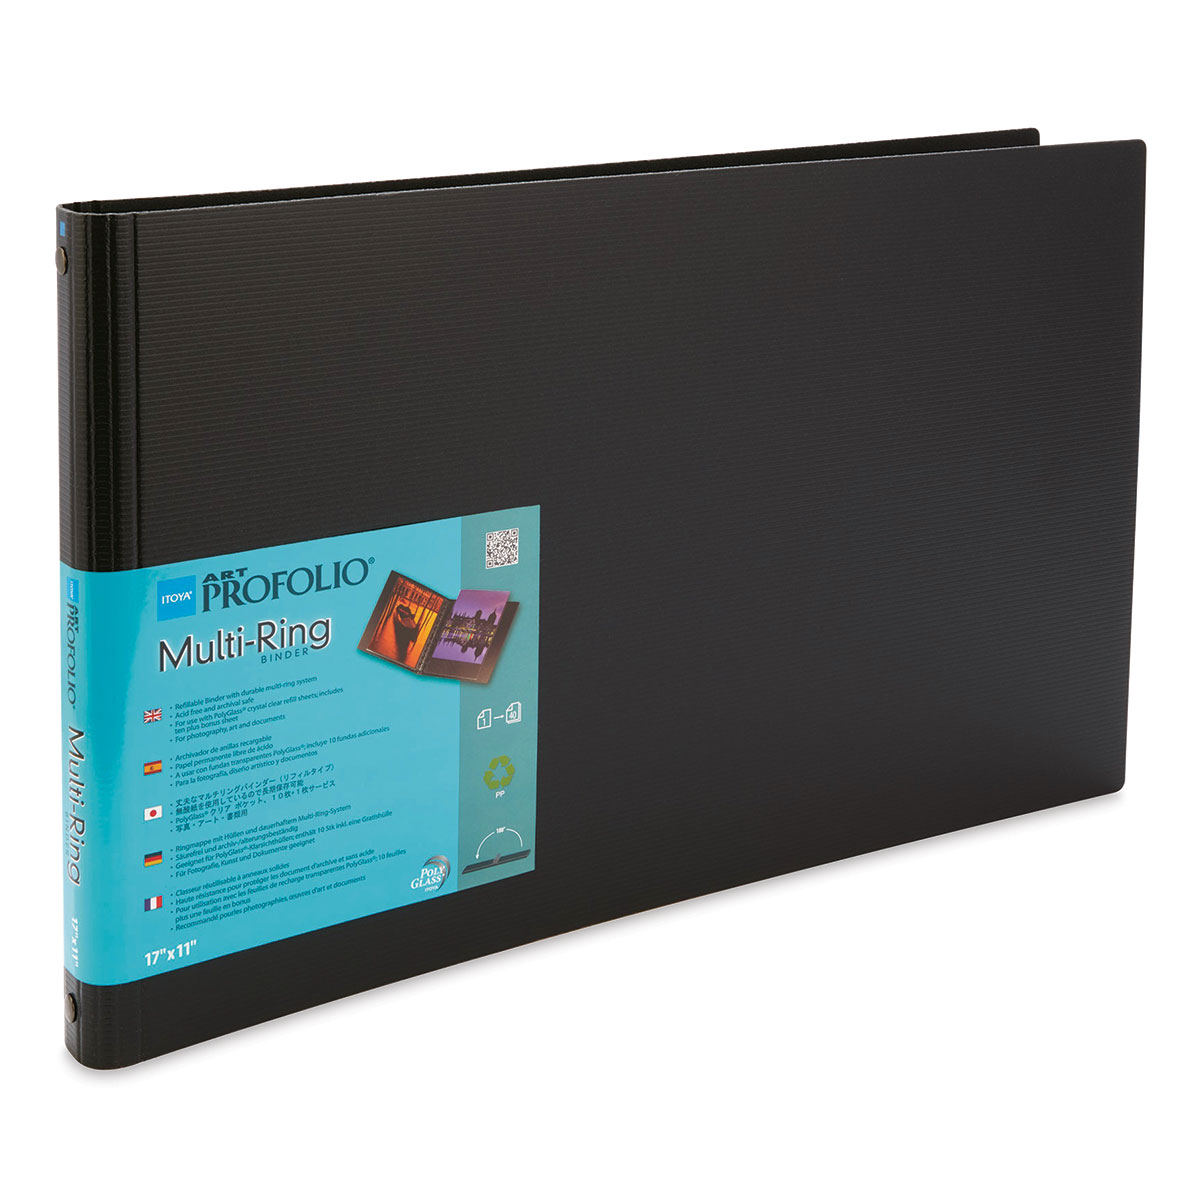 ProFolio by Itoya 10-Pack Multi-Ring Binder Refill Pages 14 x 11 Inches Landscape Art ProFolio PolyGlass 